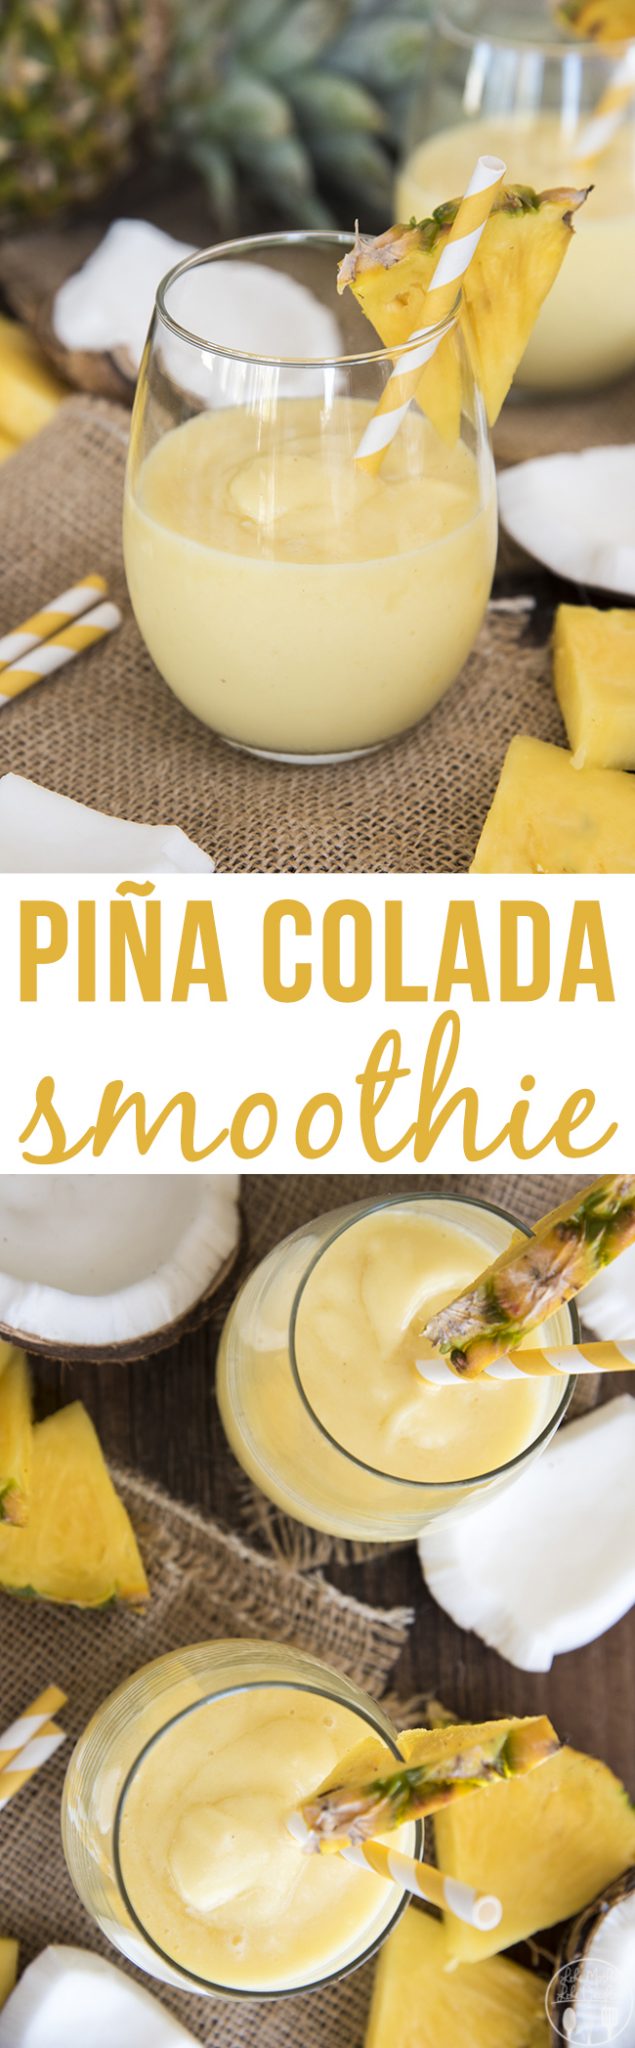 Pina Colada Smoothie - This delicious smoothie is a perfect refreshing combination of pineapple and coconut that you can enjoy all year long.